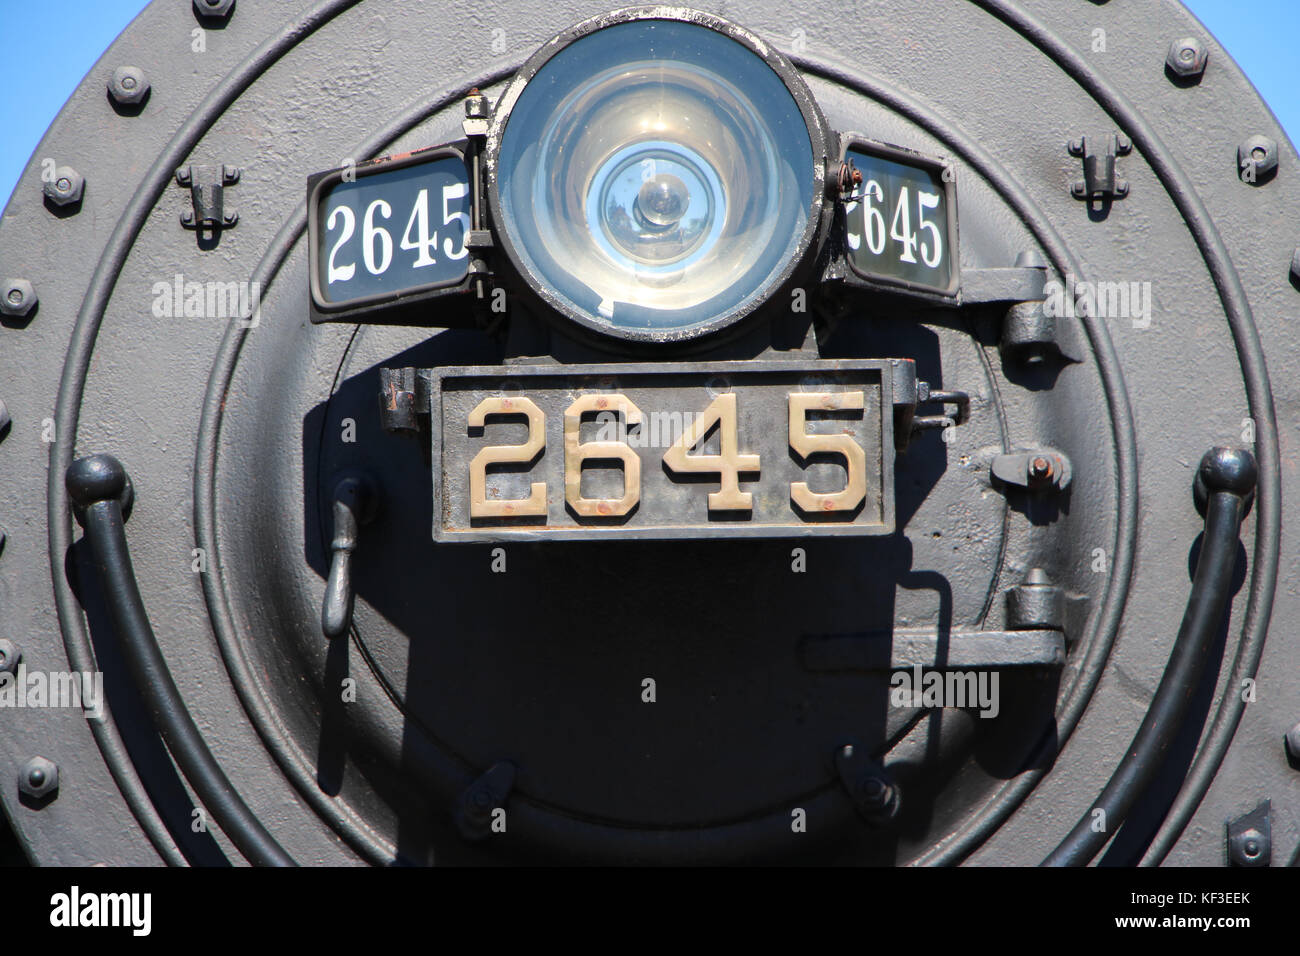 Old train locomotive up close shot of front Stock Photo